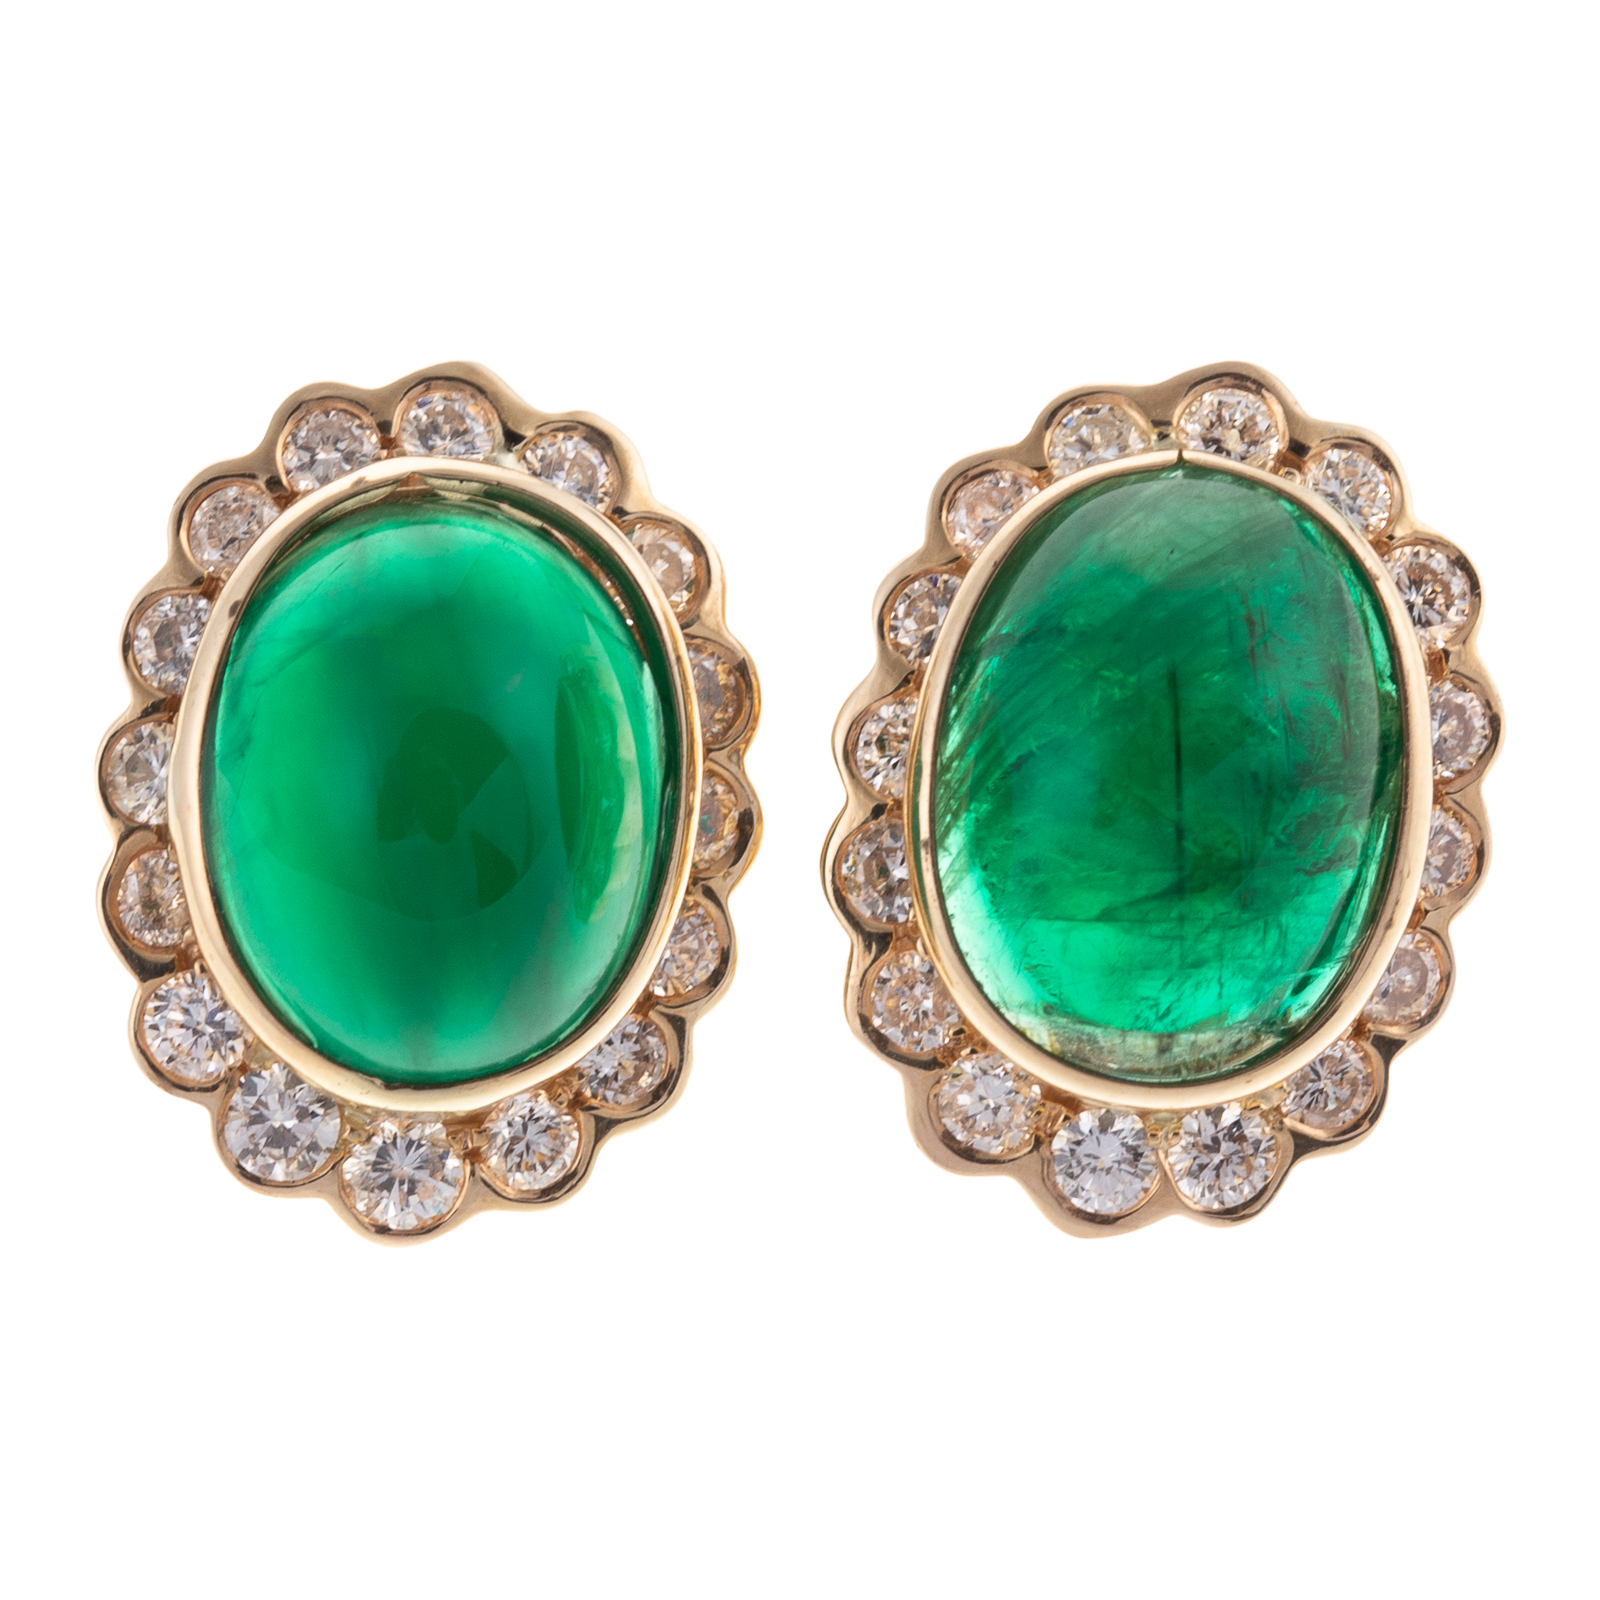 A PAIR OF VERY FINE 14K EMERALD 33494f